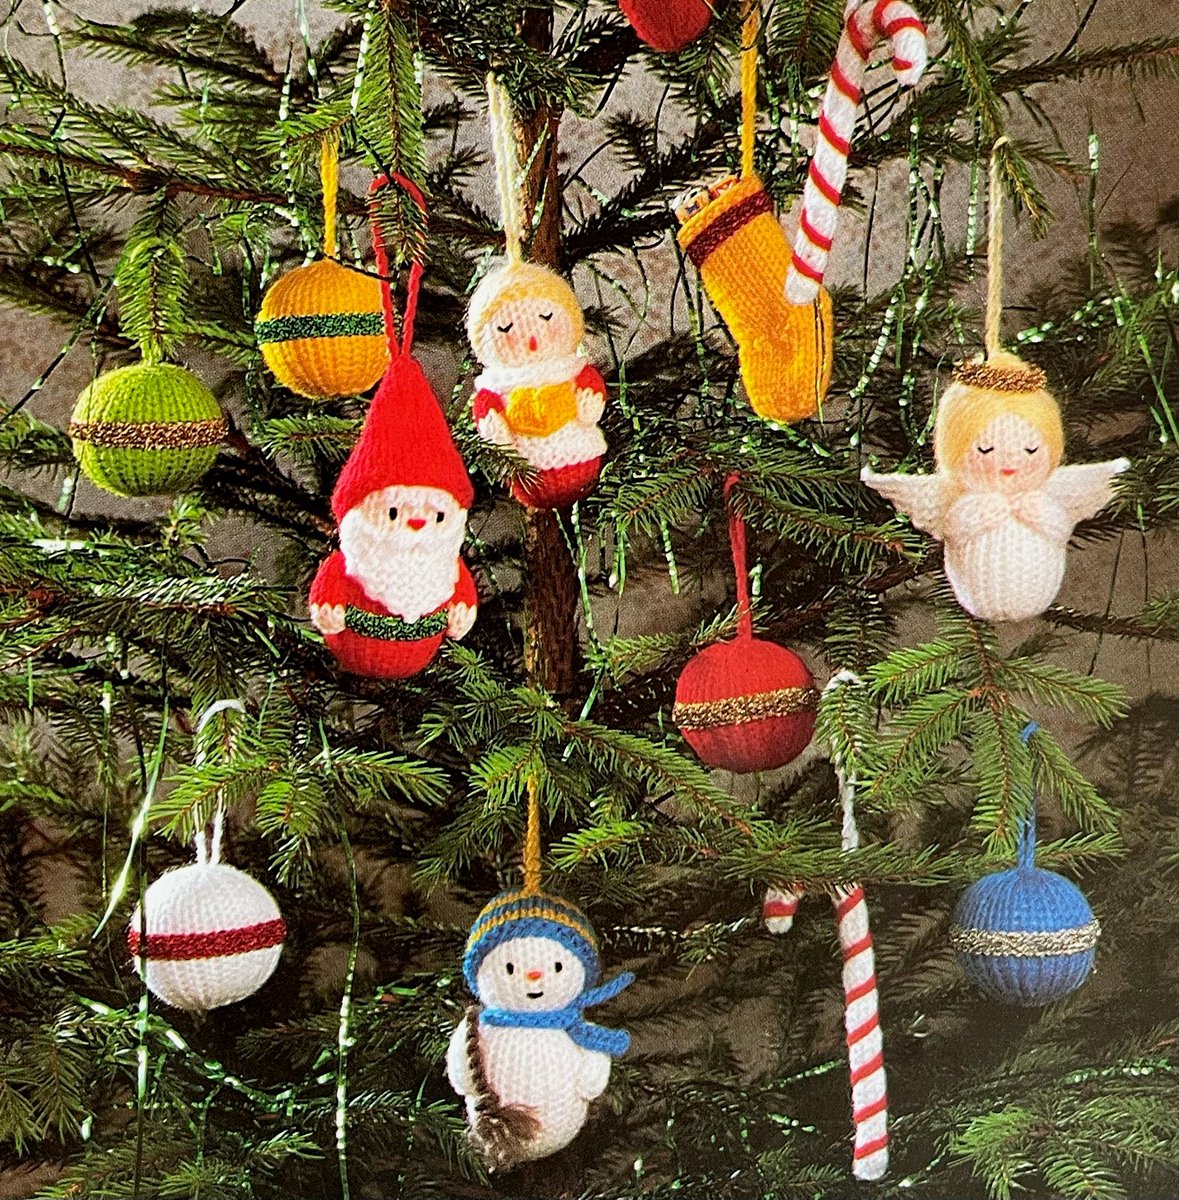 Knitted Christmas Tree Trims Knitting Charm PDF Pattern Instant Download etsy.me/3VUUPSH #embroidery #knittingpattern #christmastreetrims #christmastree #santa #snowman #christmasstocking #christmascandycan #vintage #earlybiz #shopindie #quickmakes #treemagic